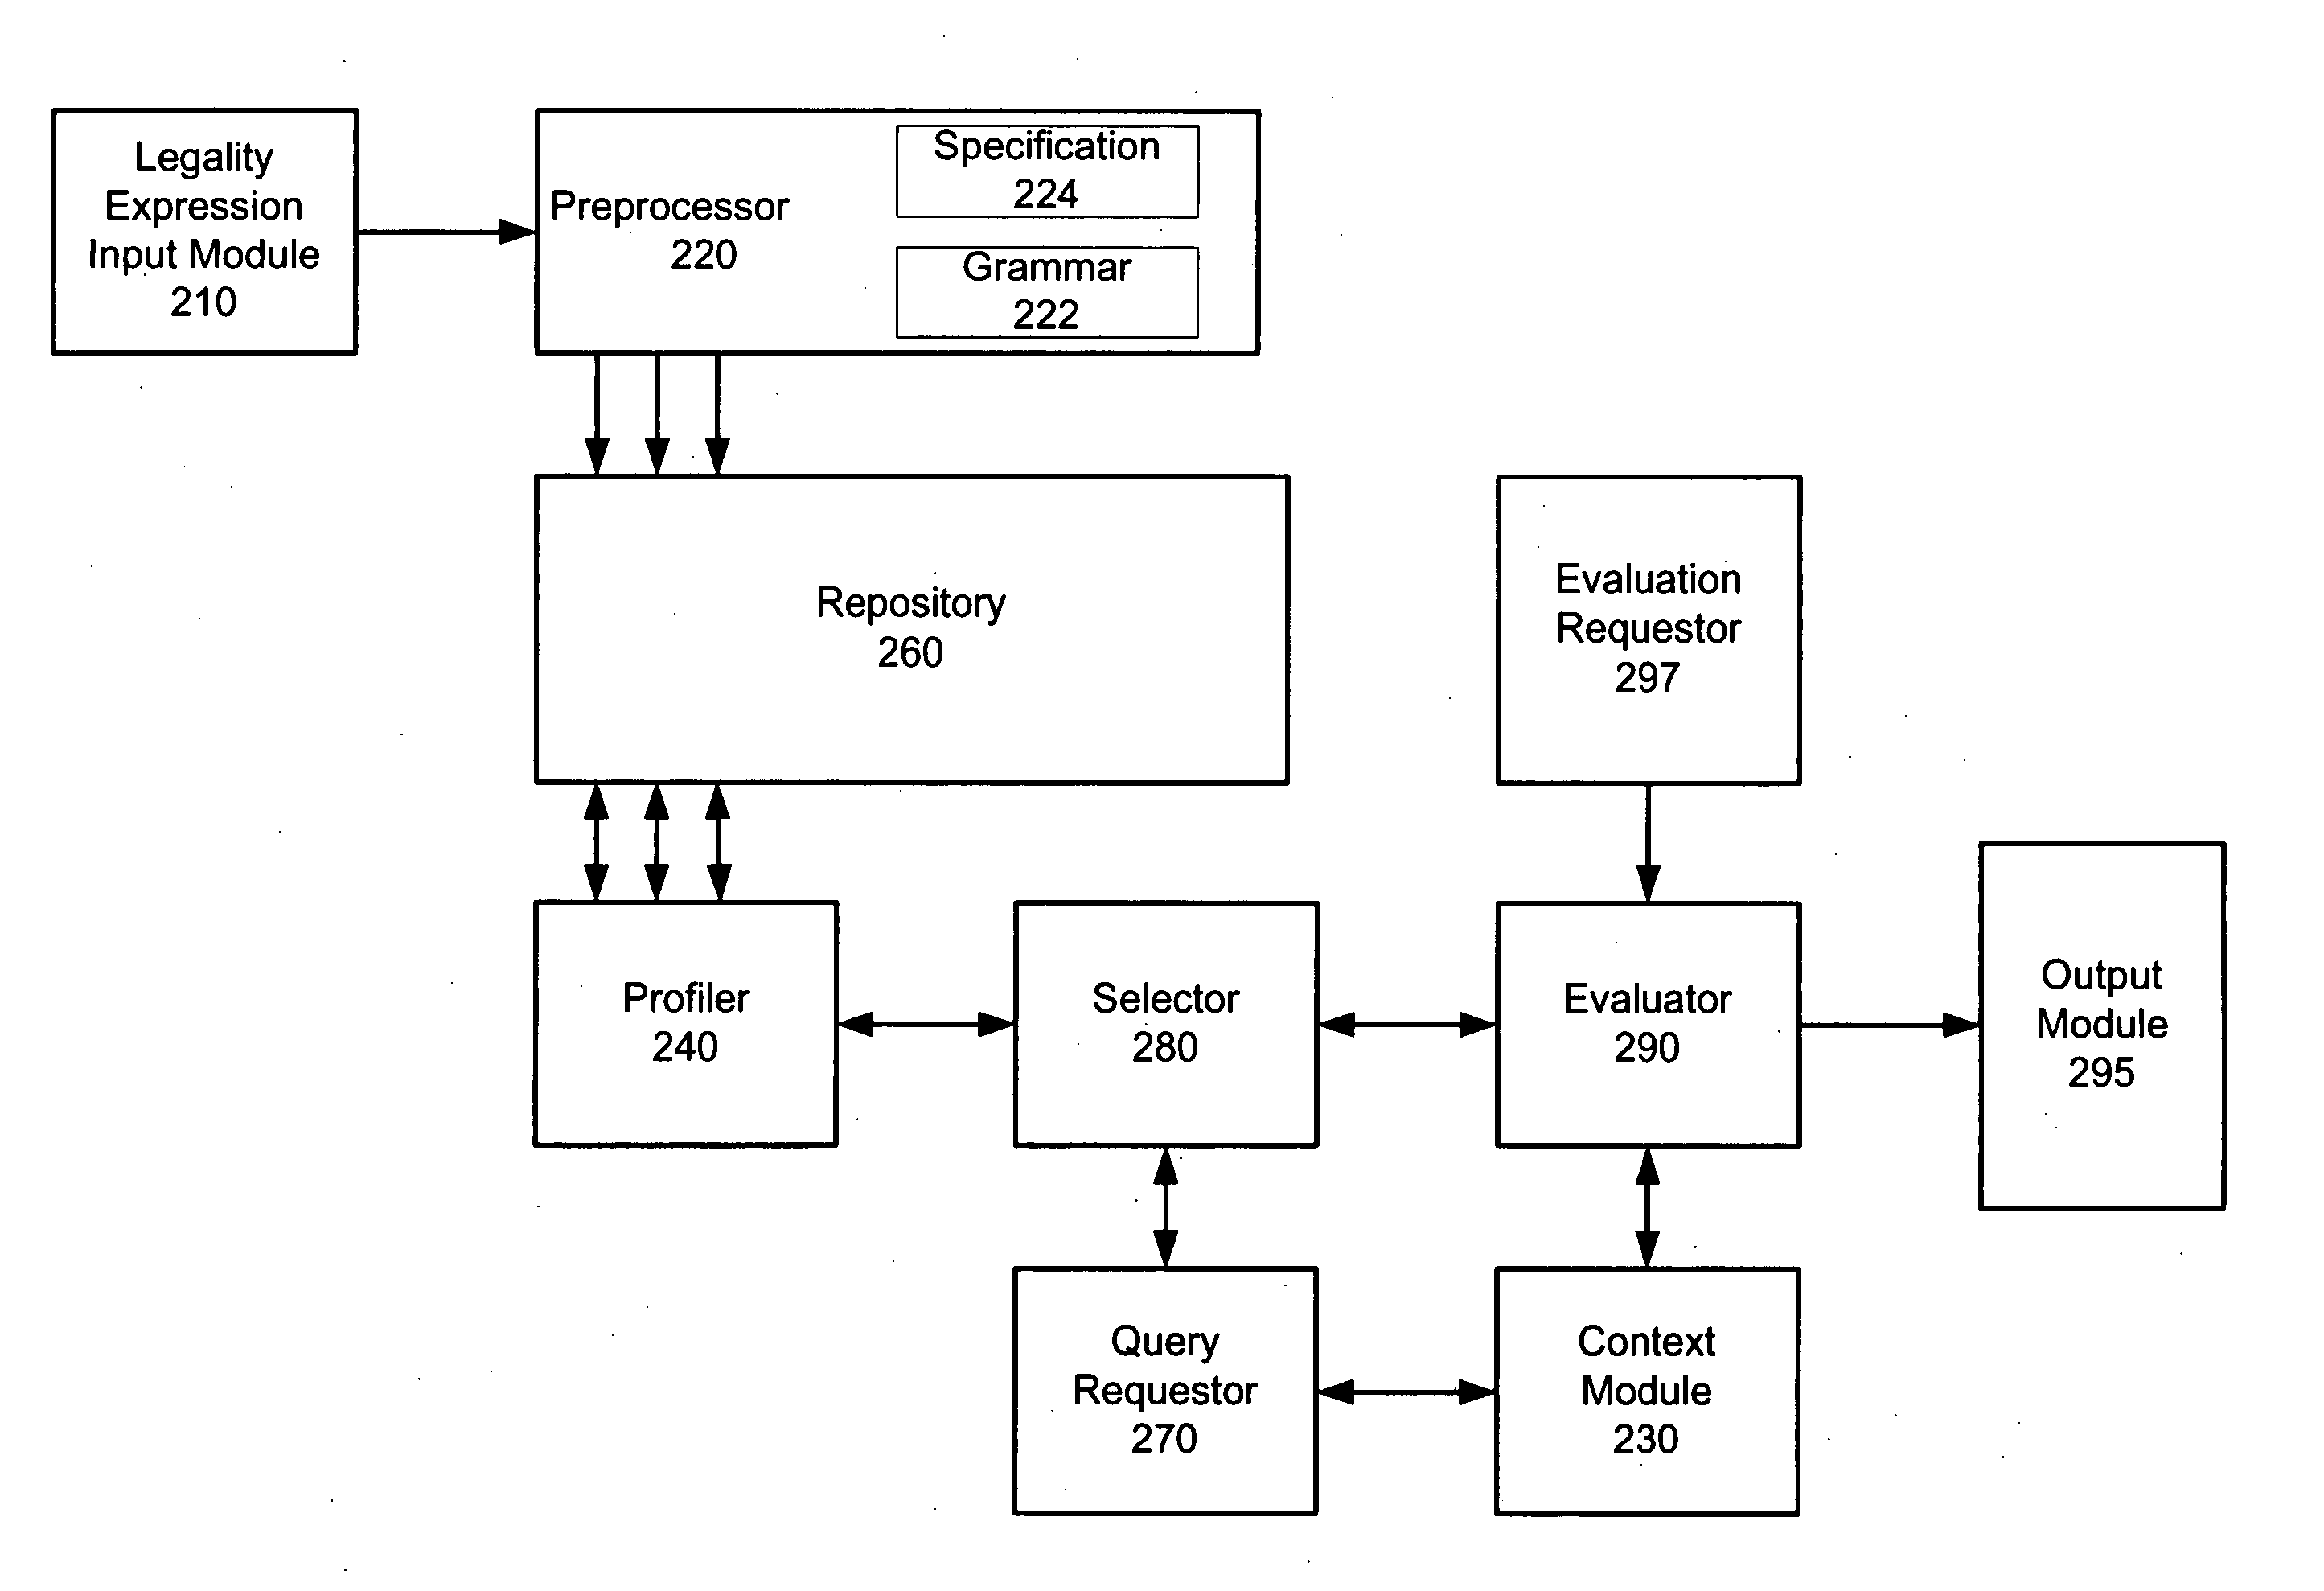 Method and system for processing grammar-based legality expressions